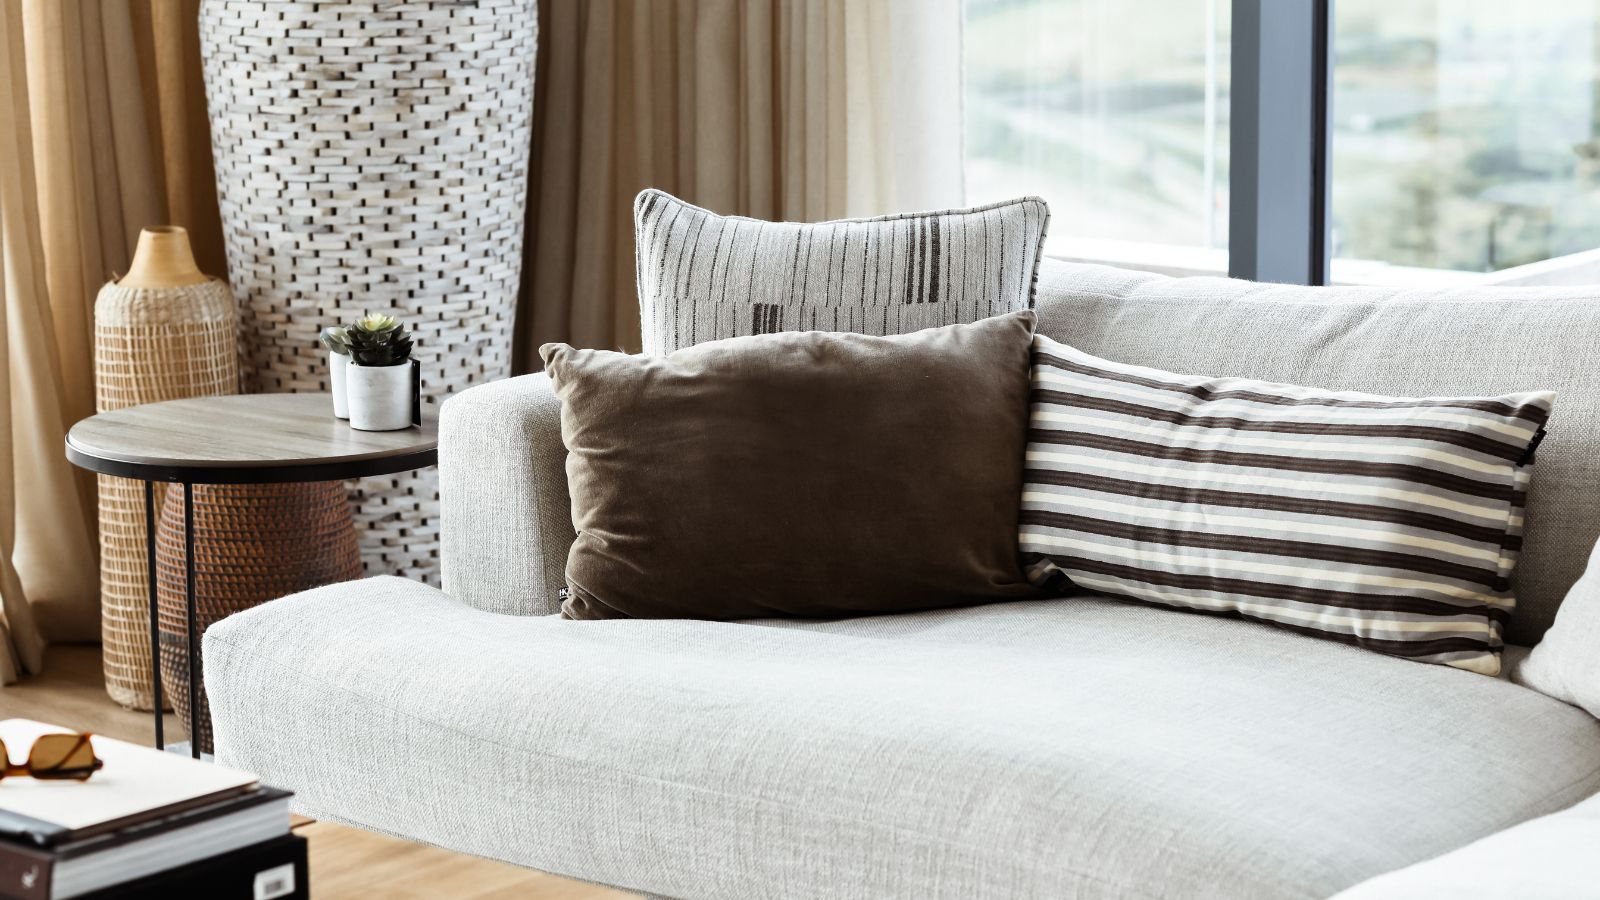 7 Top Tips Of How To Clean Upholstery